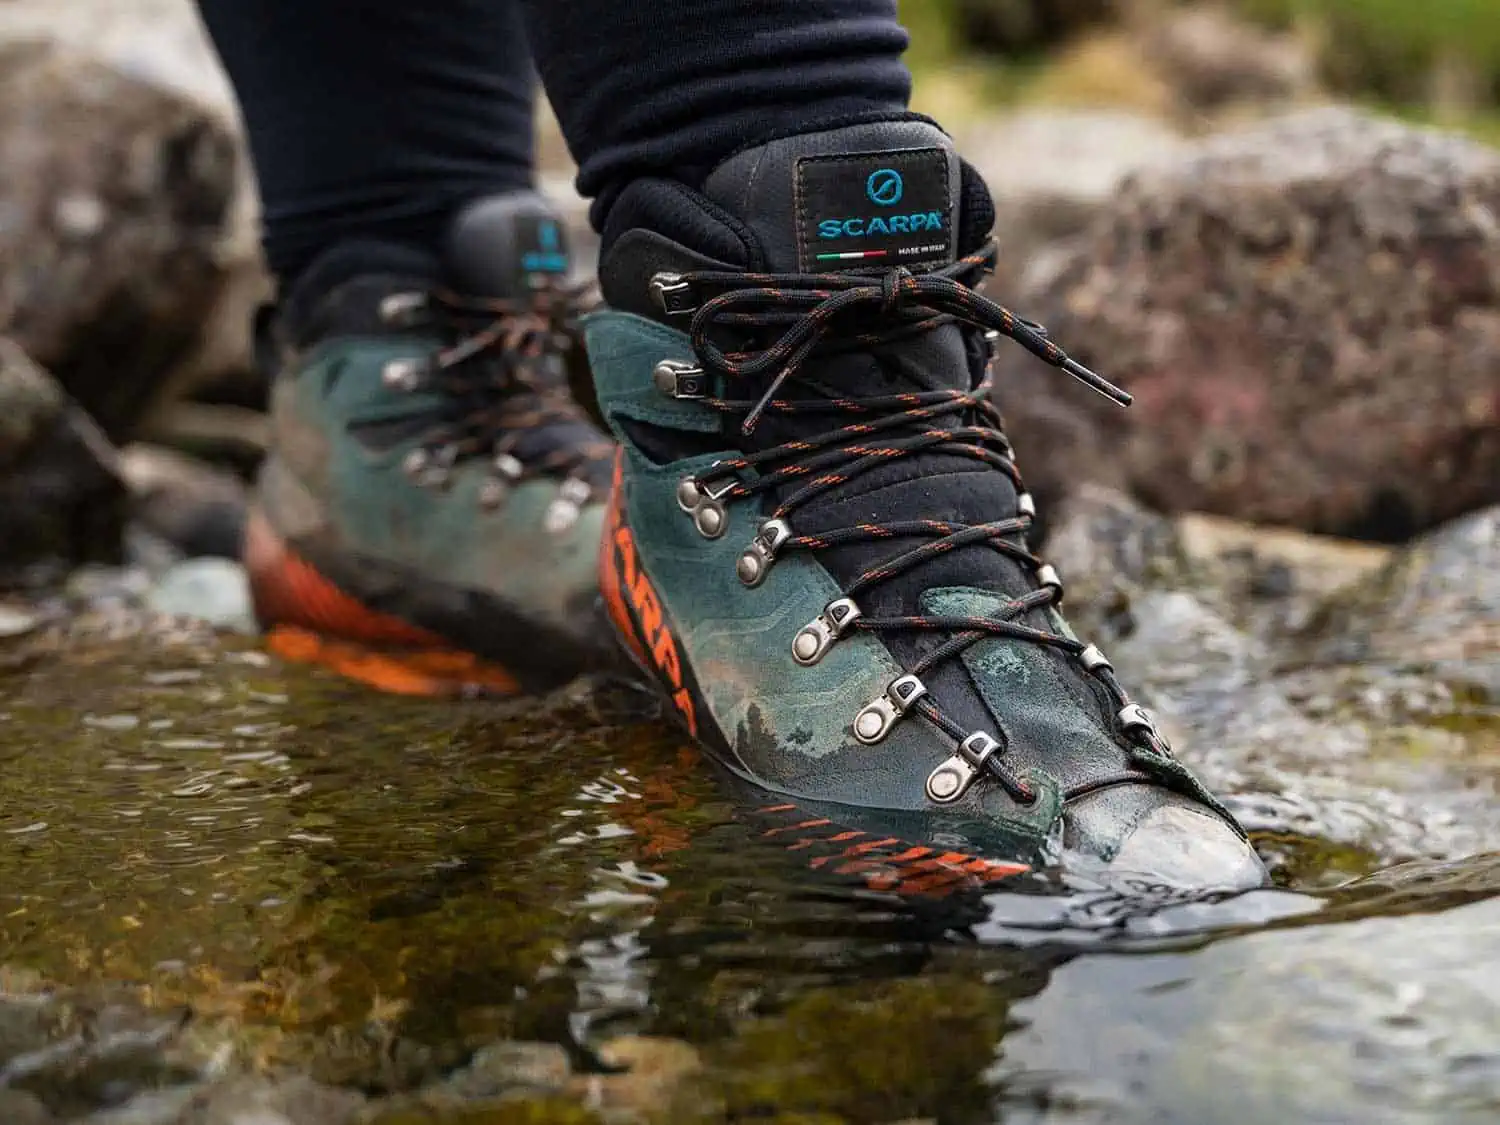 Hiking Shoes & Boots